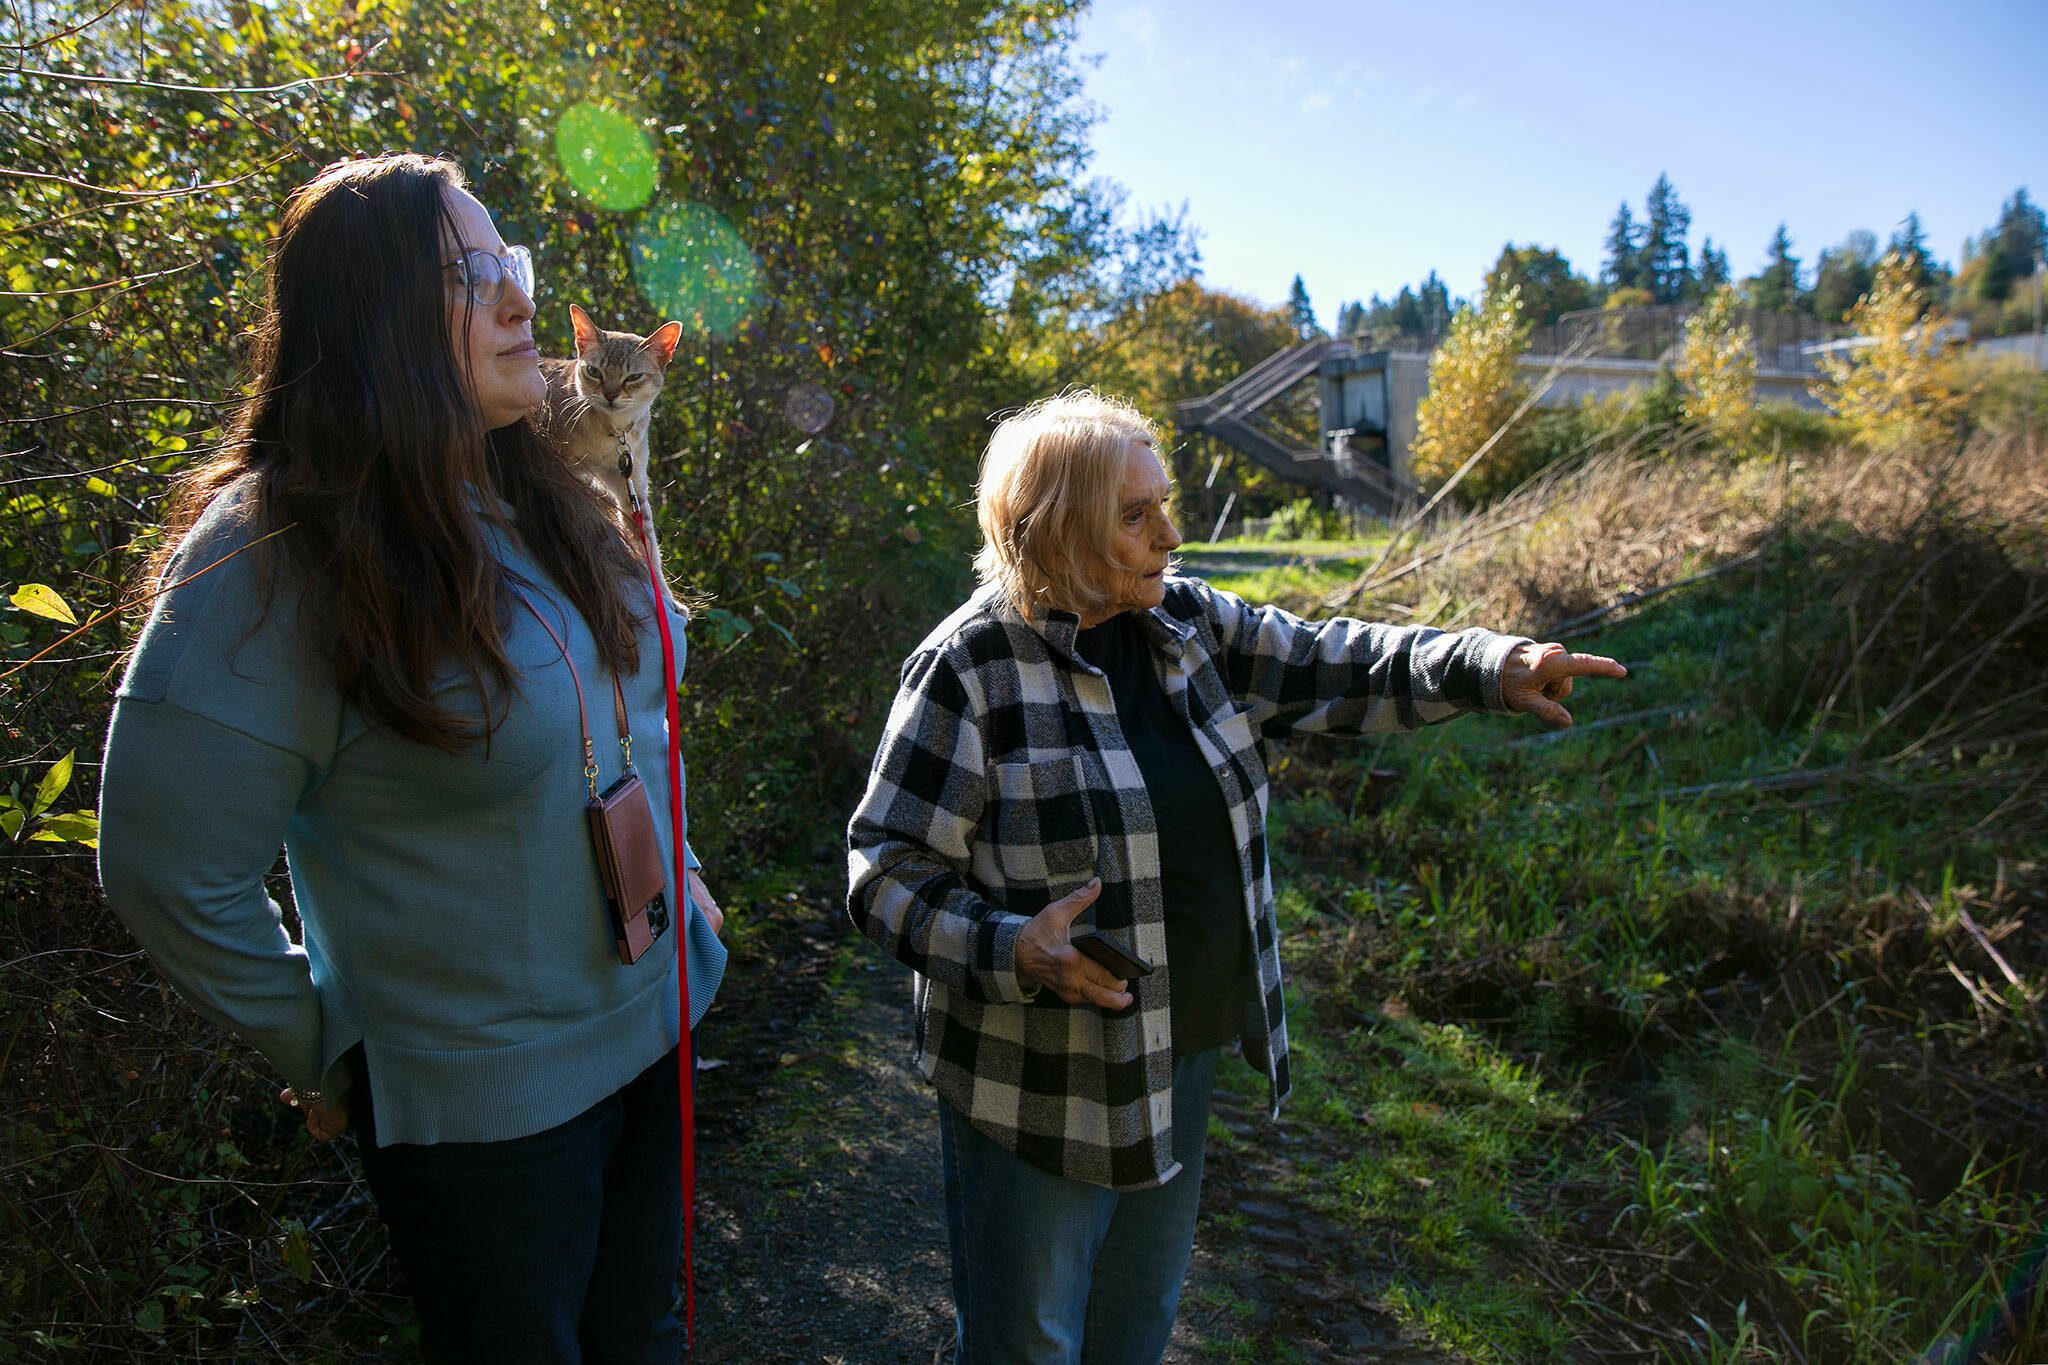 Brenda Bolanos-Ivory and her cat Piccolo, left, along with Gail Chism look over a section of cleared plant growth at Lowell Riverfront Park on Wednesday, Oct. 18, 2023, in Everett, Washington. The two Lowell residents feel the clearing of trees and undergrowth at the park is unacceptable. (Ryan Berry / The Herald)